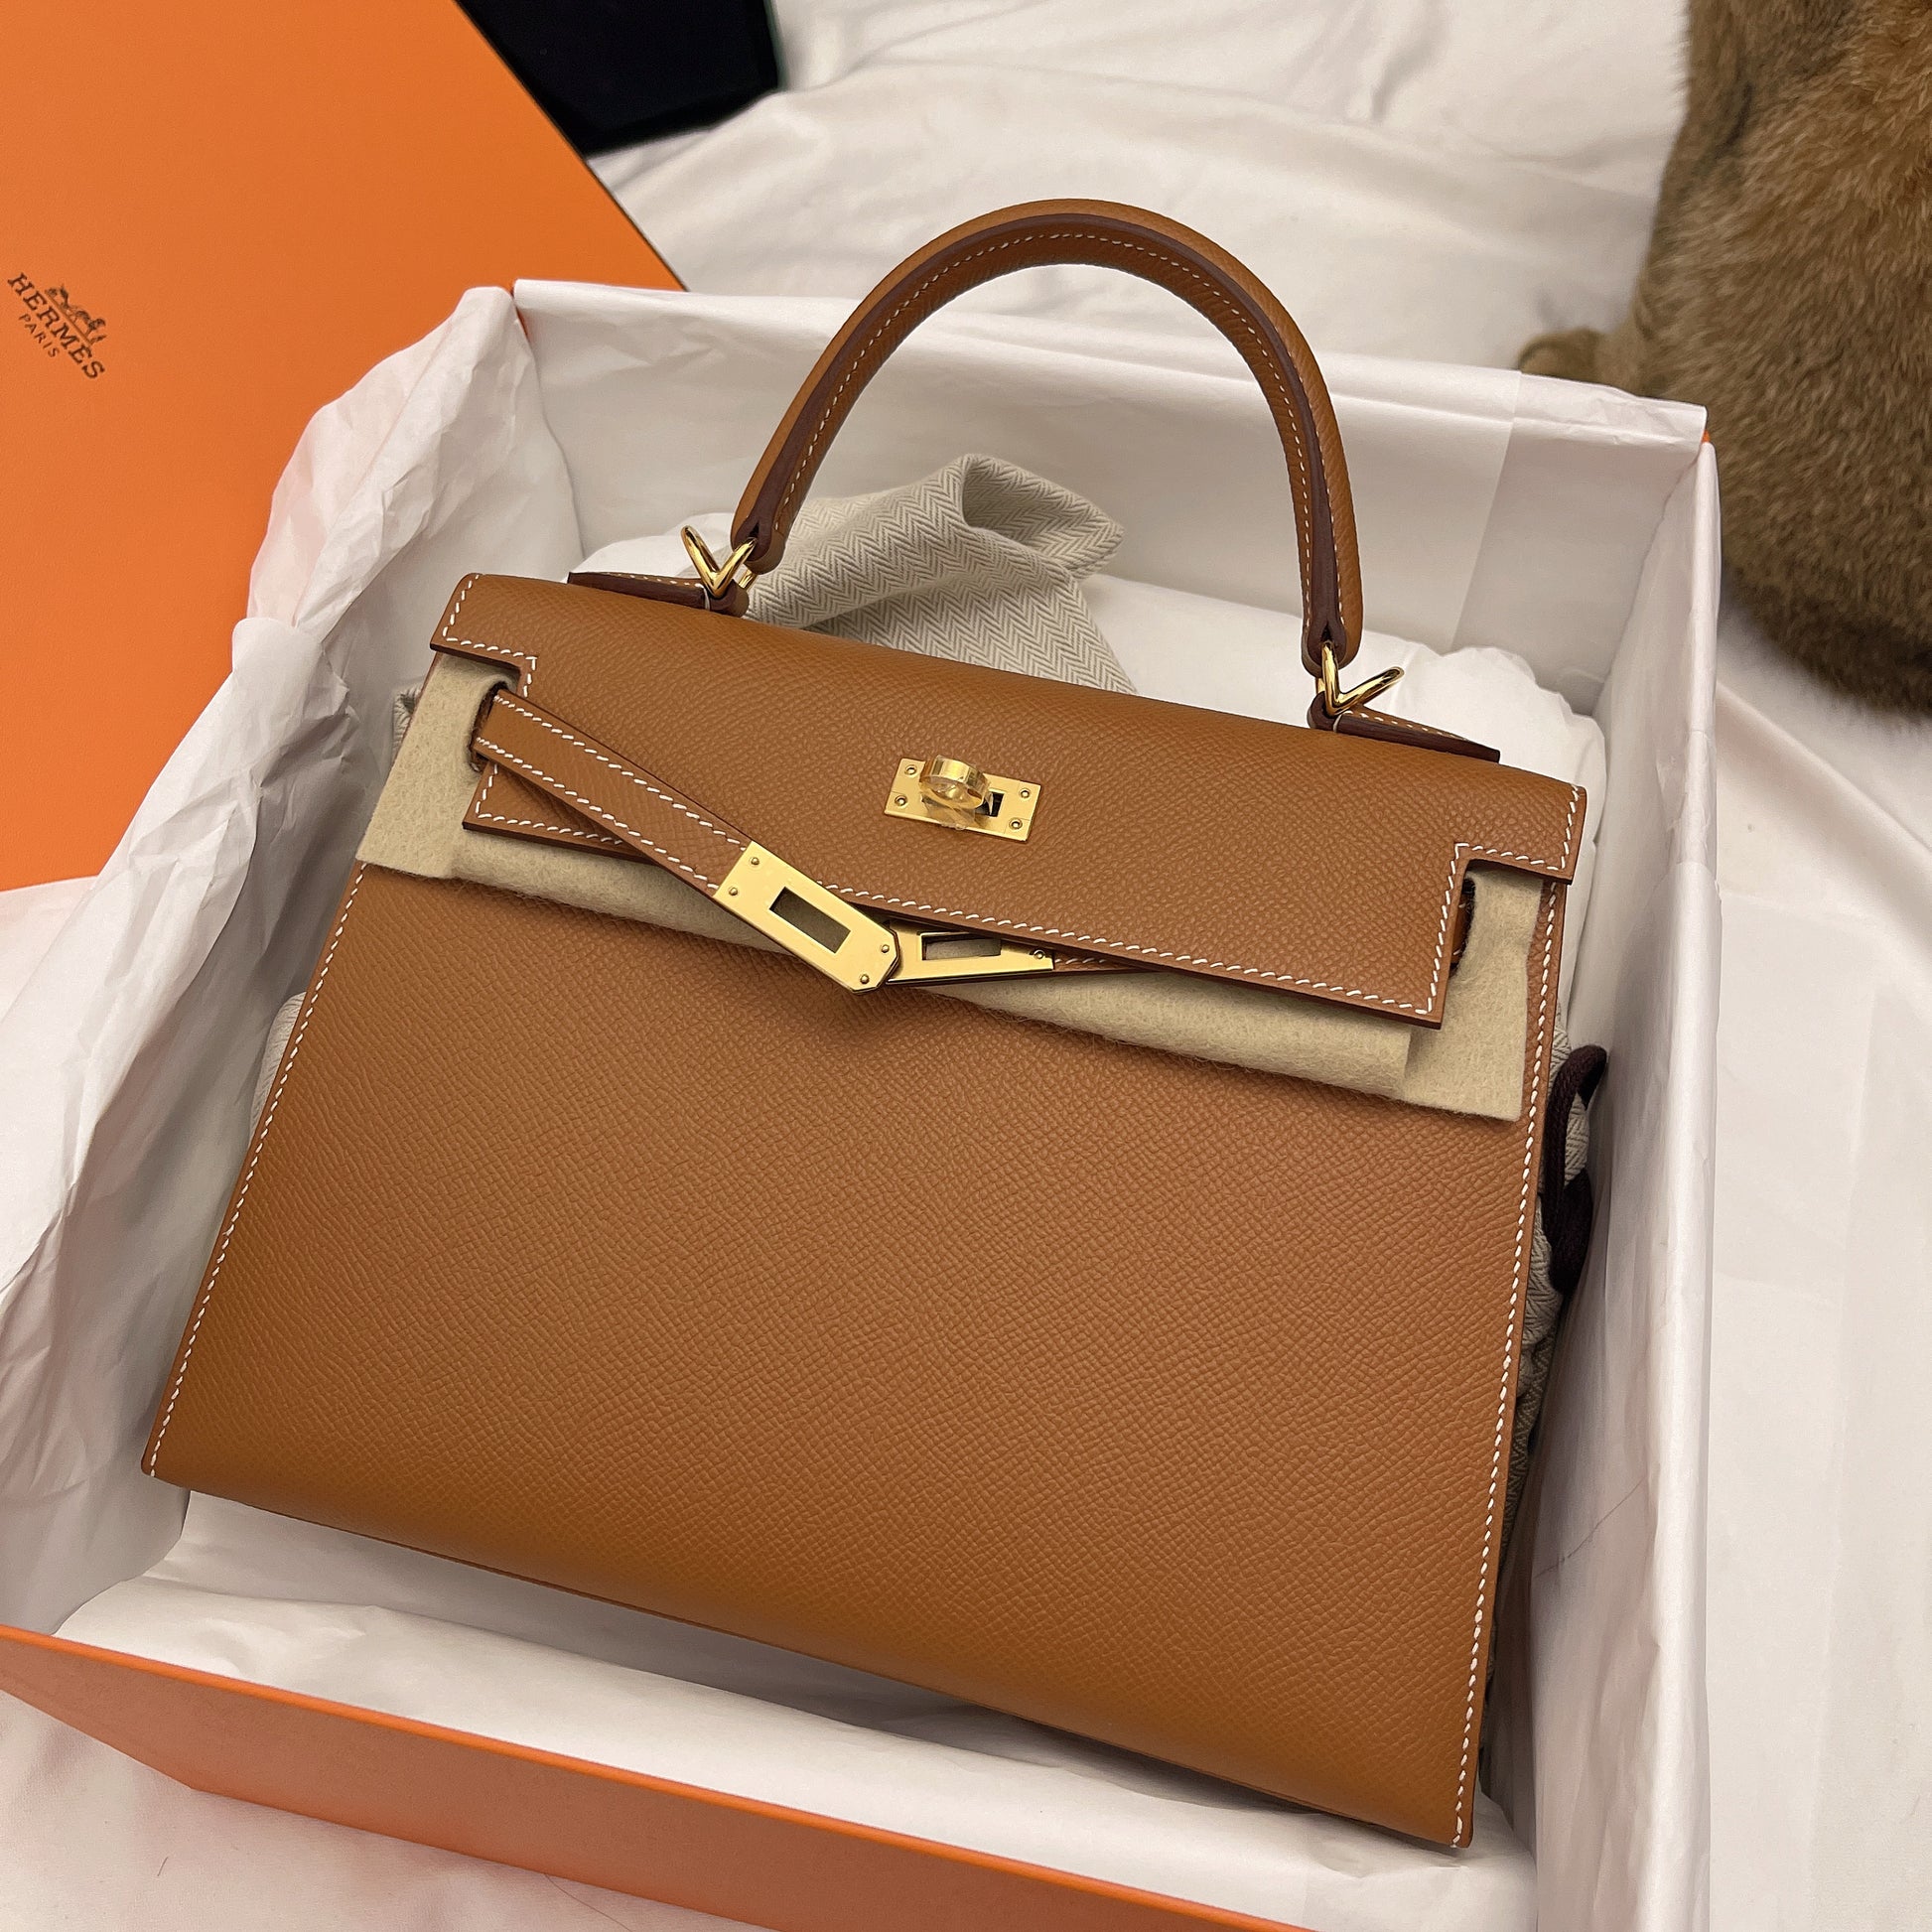 Hermès - Authenticated Kelly 25 Handbag - Leather Gold Plain for Women, Never Worn